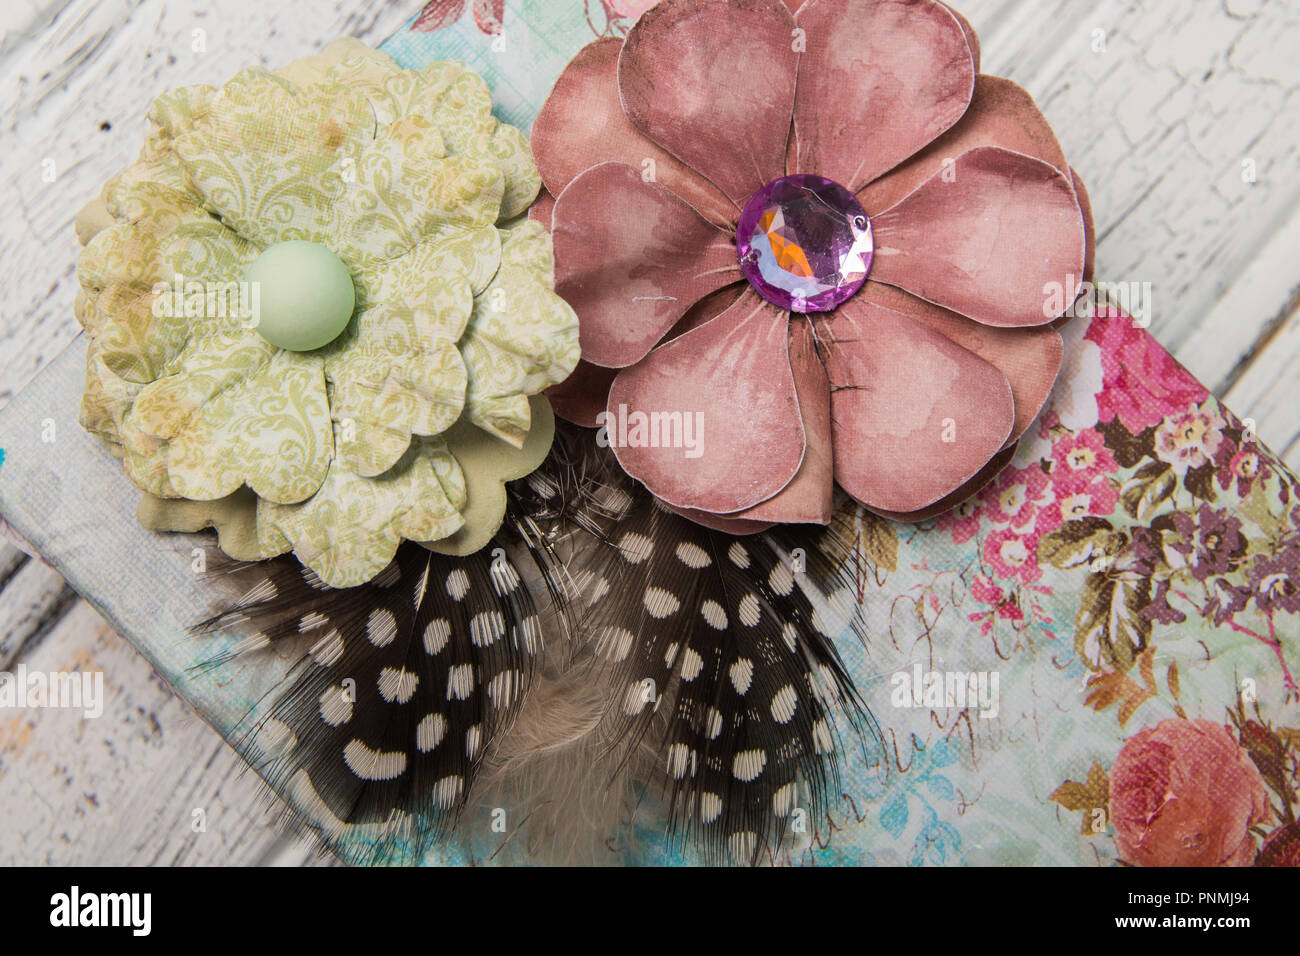 Shabby chic gift box with flowers and feathers Stock Photo